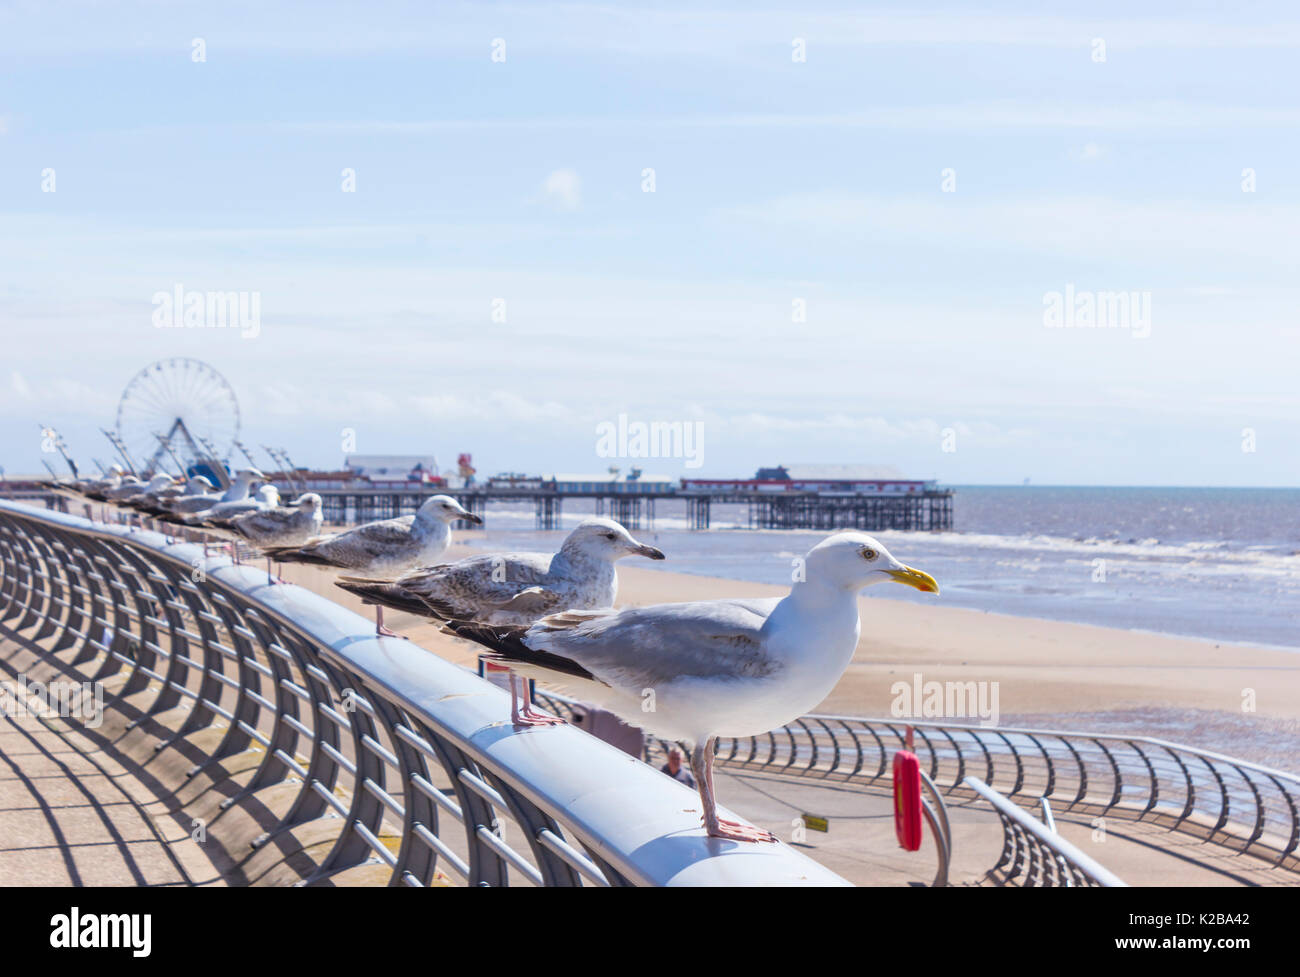 Blackpool, Fylde Coast, Lancashire, England. Row of seagulls perched on a railing looking out to sea. Stock Photo